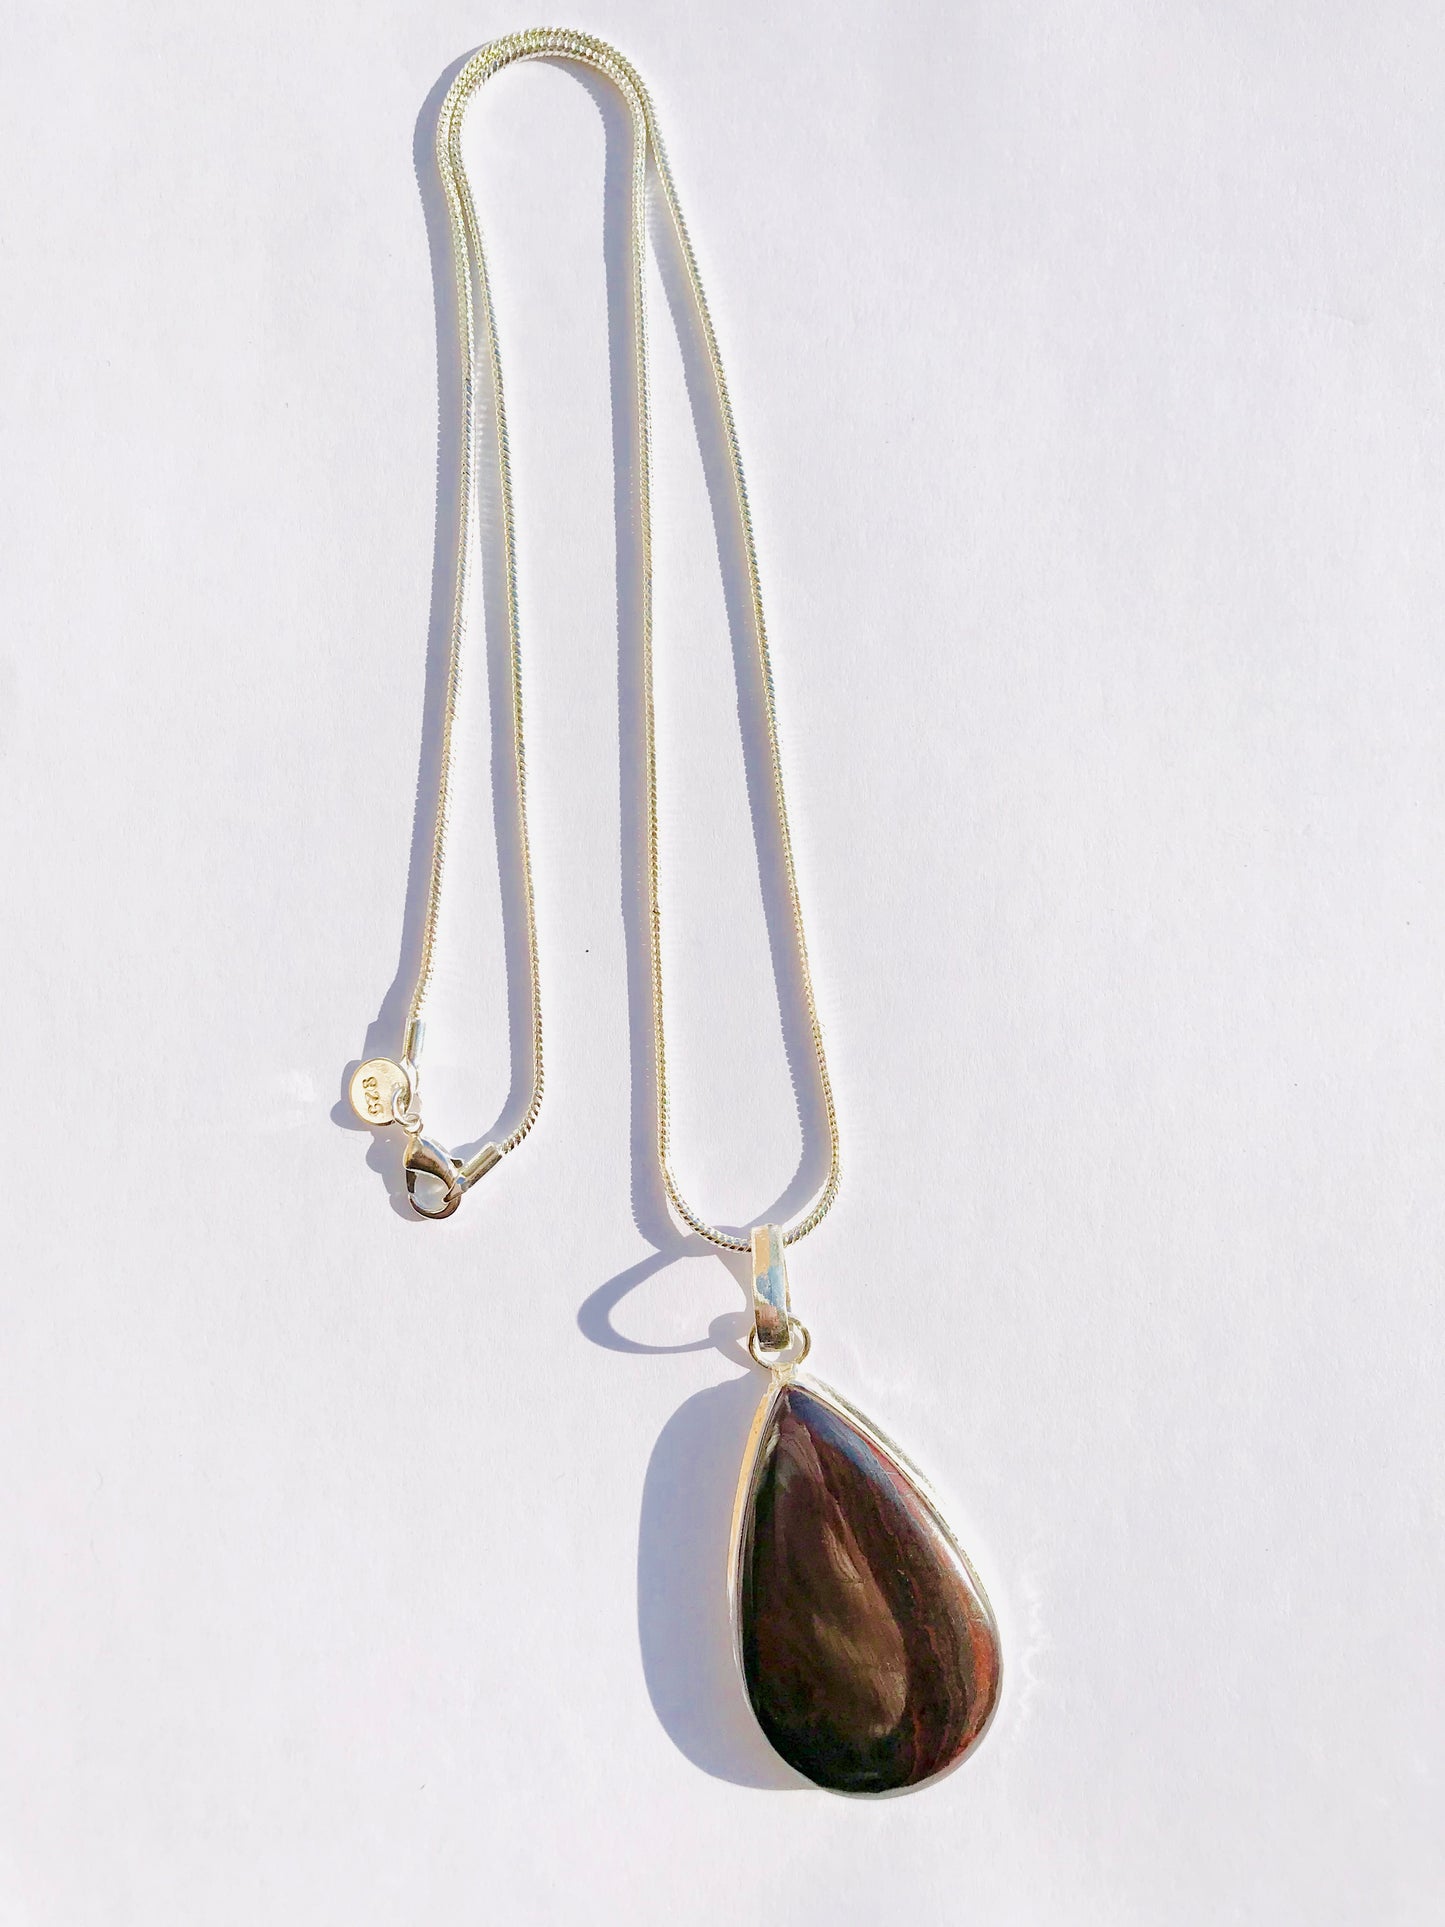 Tiger Iron Crystal Healing Pendant Necklace - Crystal Boutique.co.uk